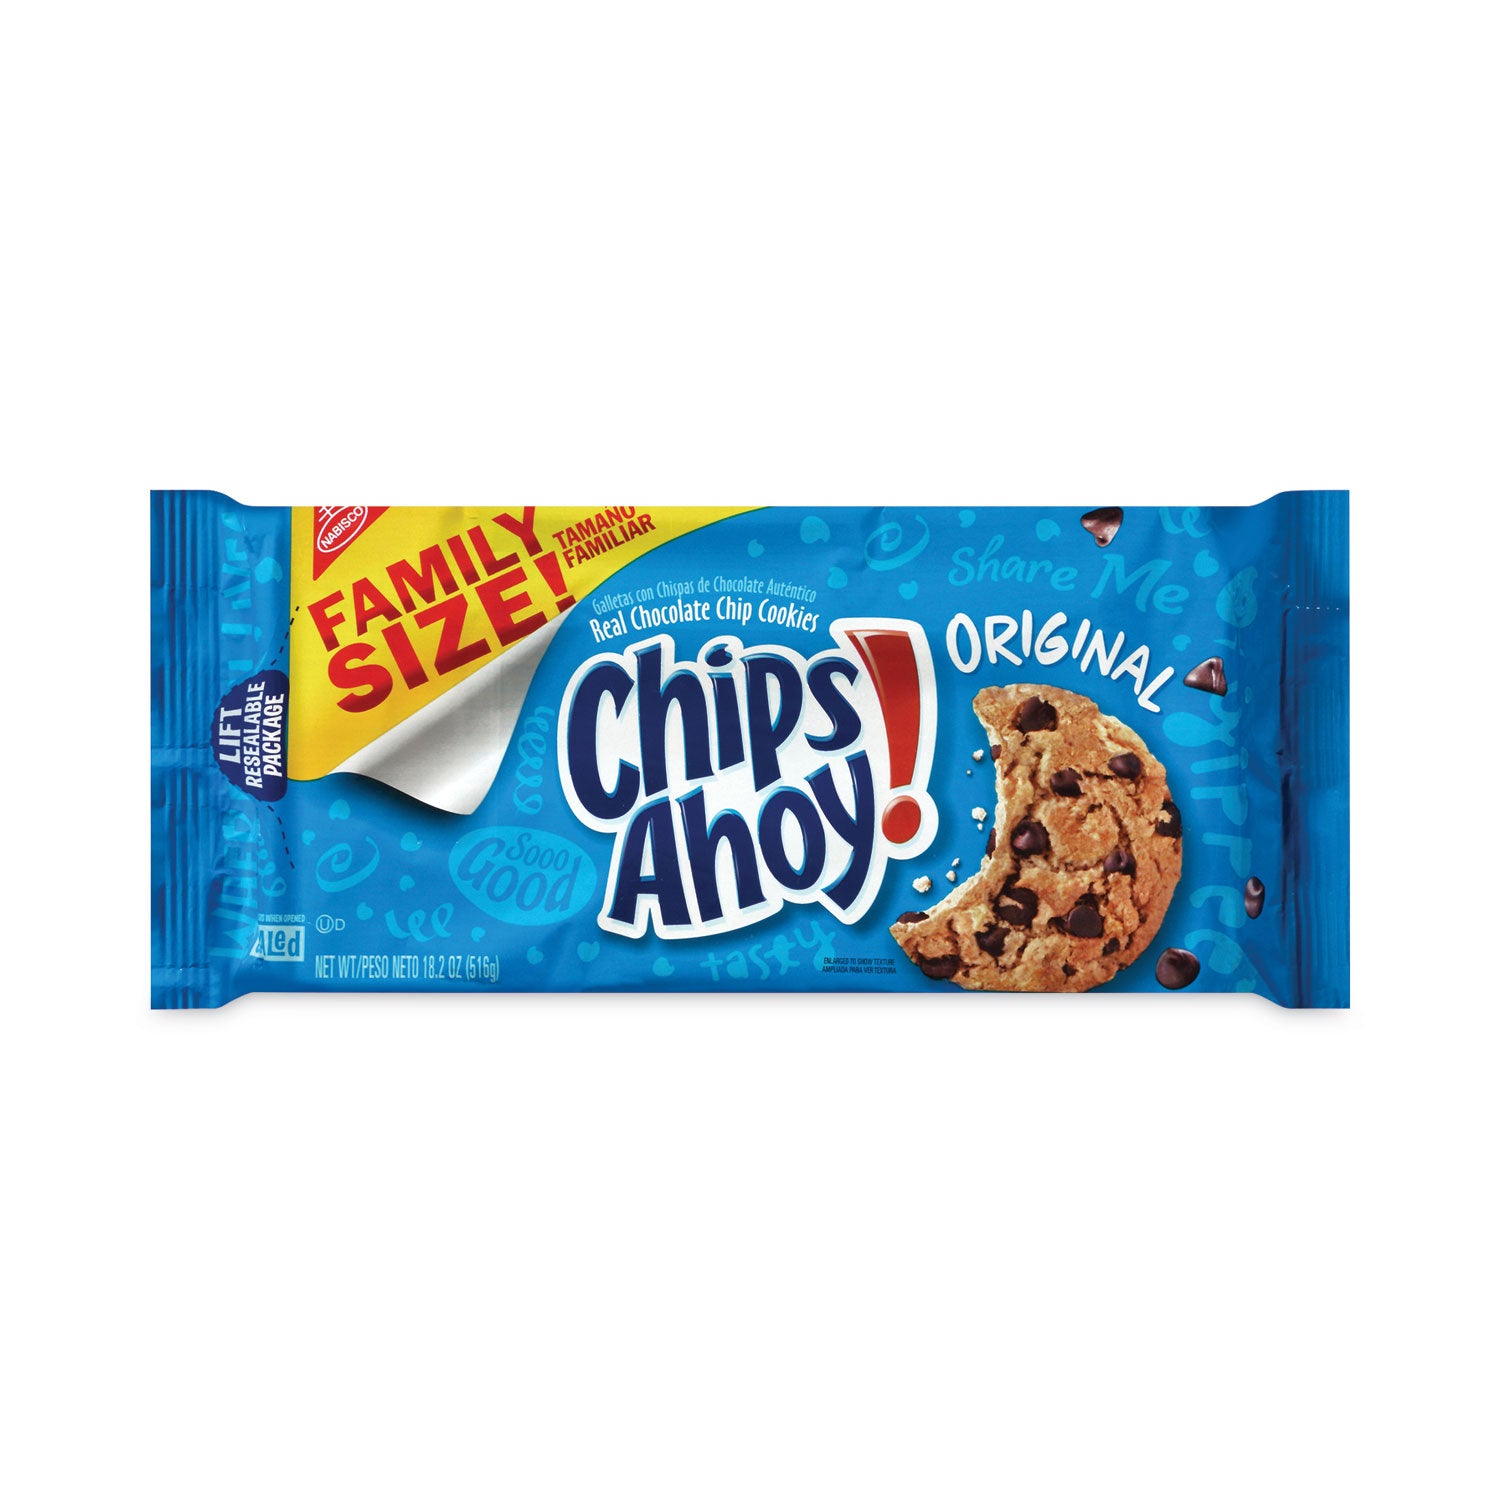 chips-ahoy-chocolate-chip-cookies-3-resealable-bags-3-lb-66-oz-box-ships-in-1-3-business-days_grr22000425 - 1